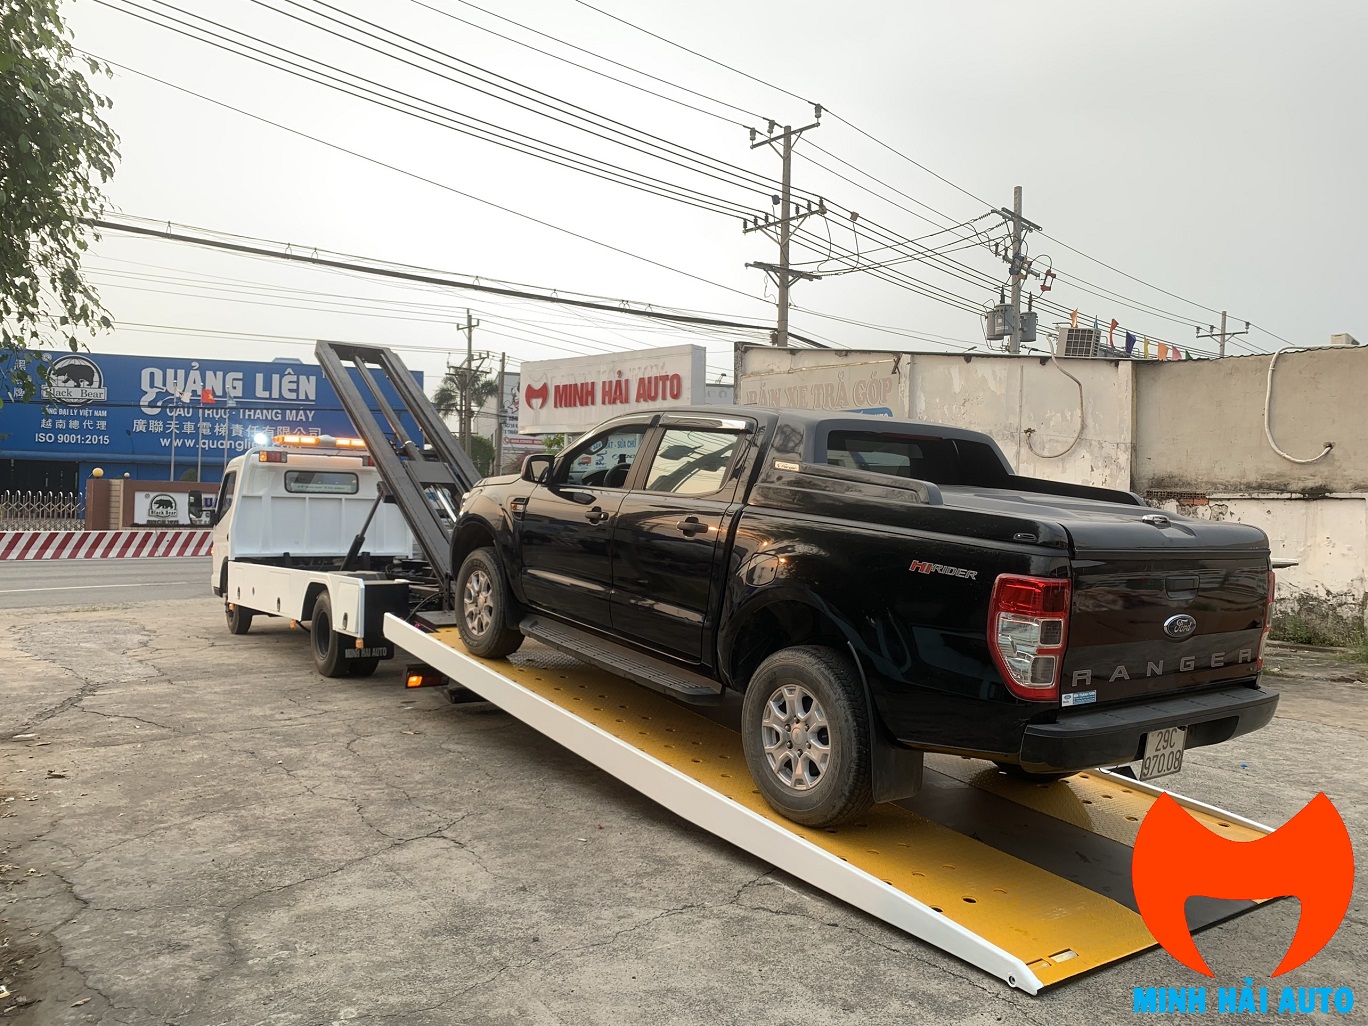 Flatbed wheel lift tow truck strong lift system